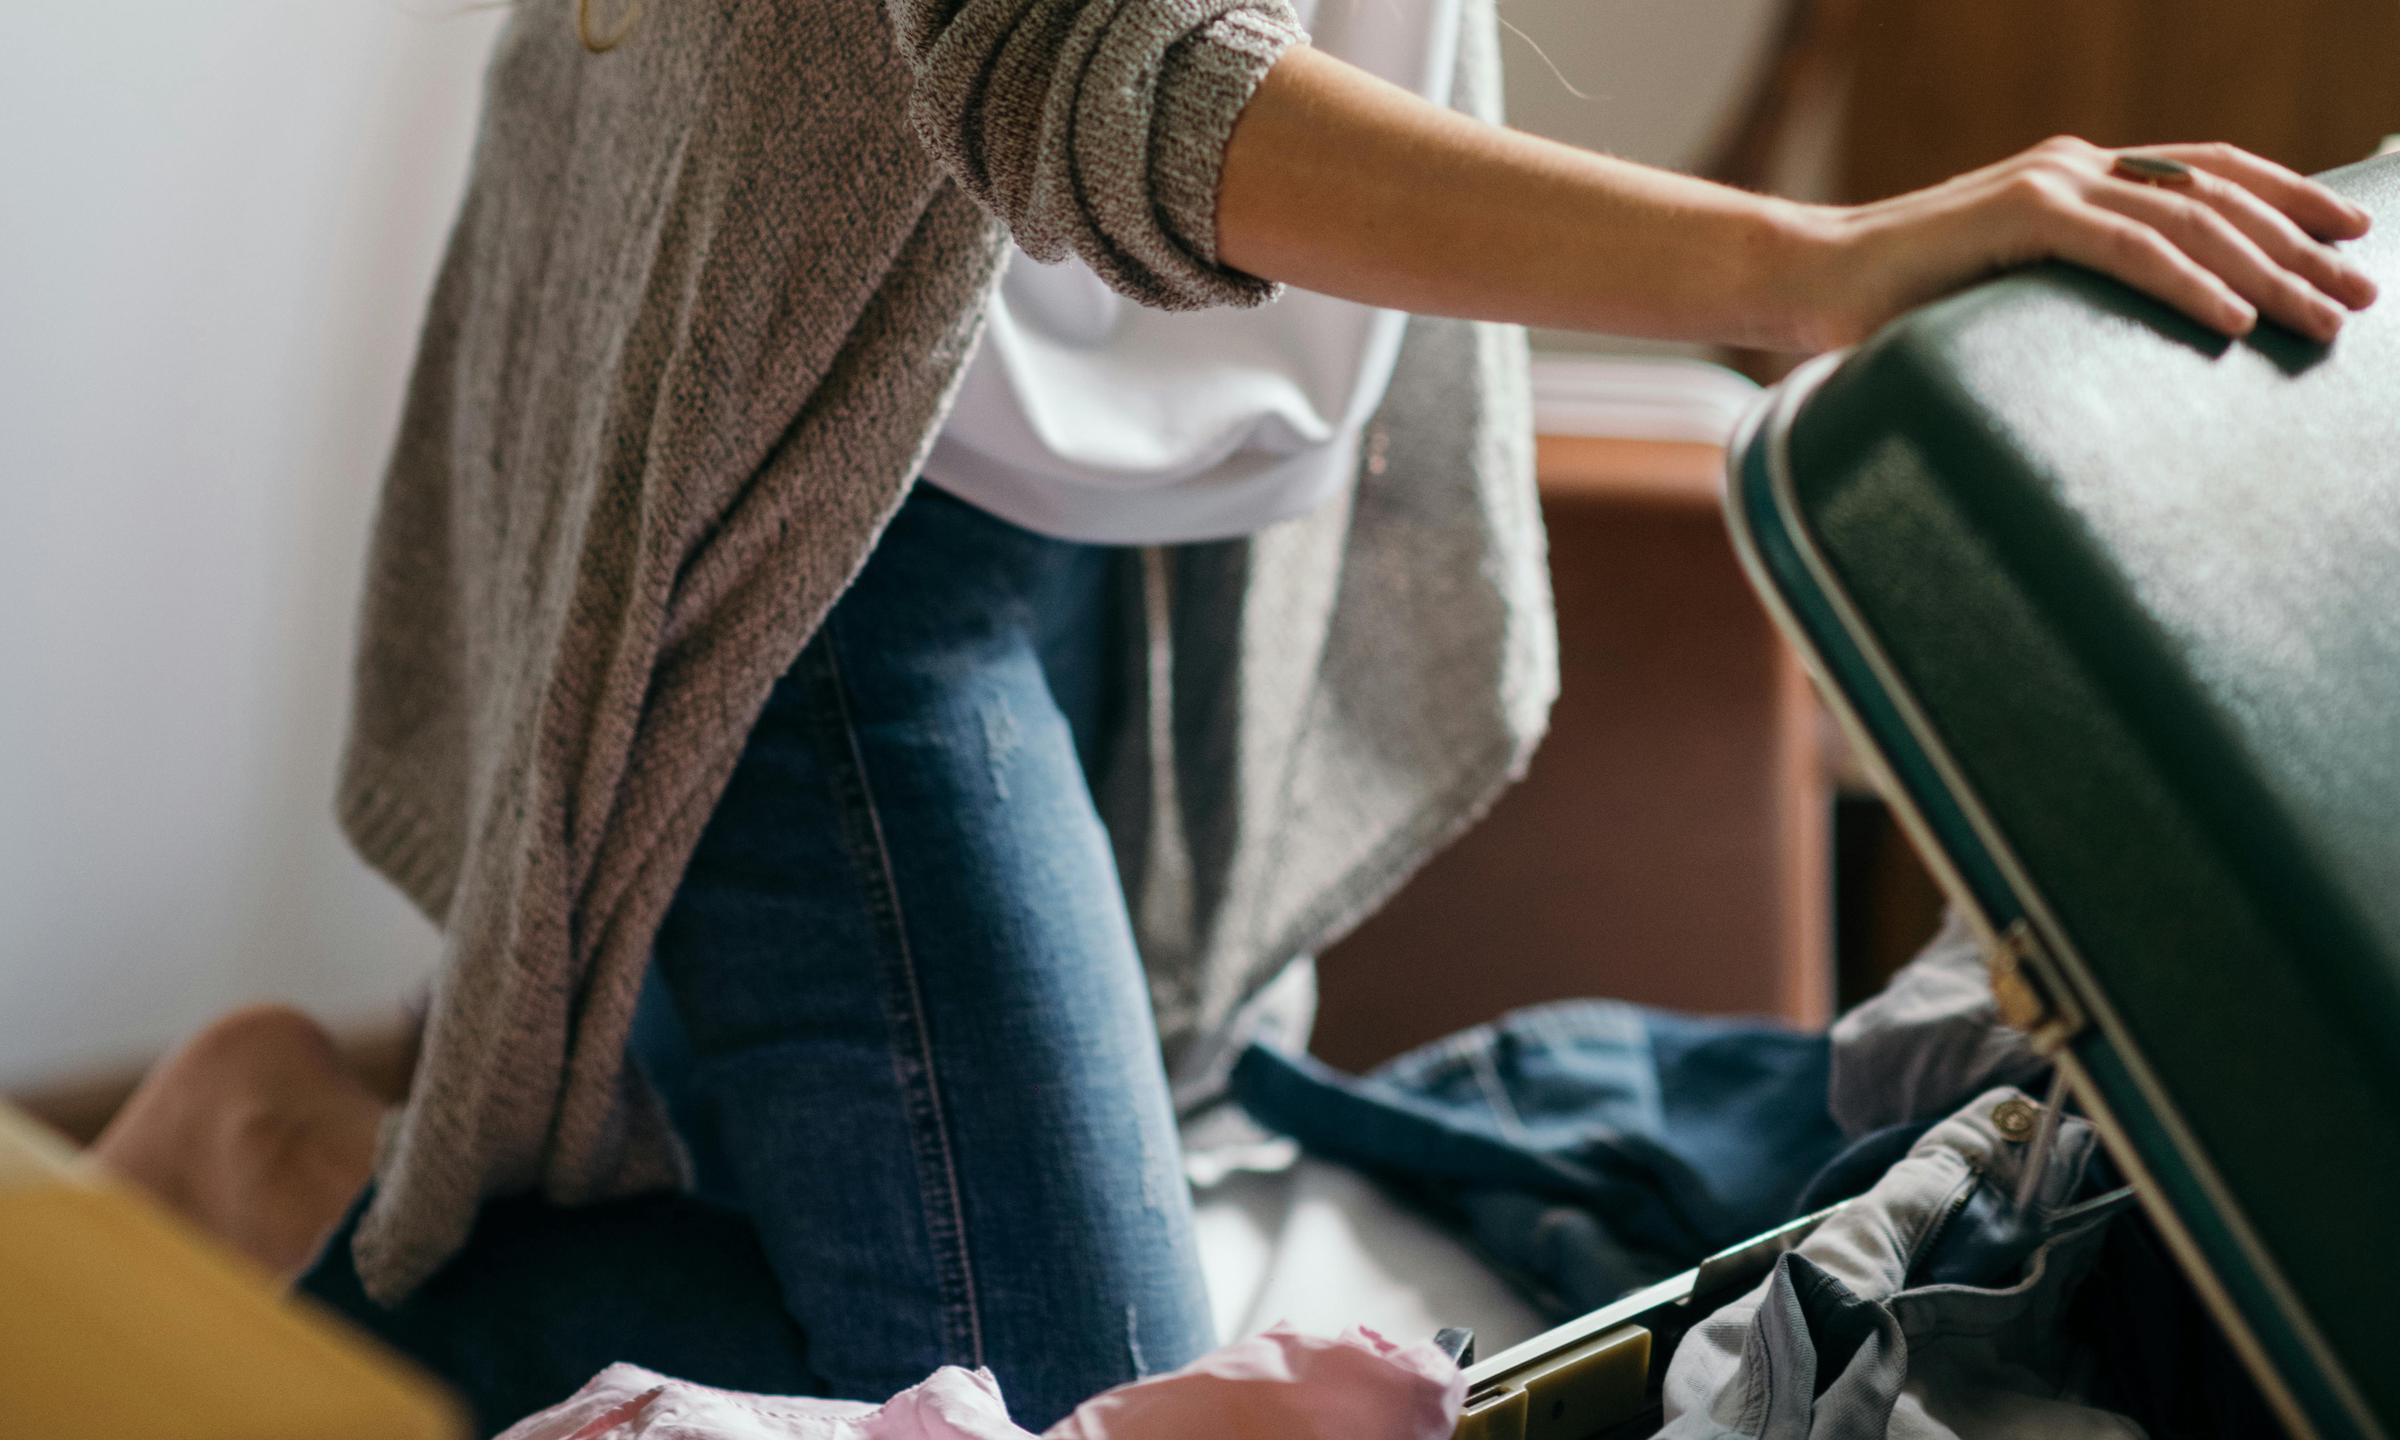 A woman packing a suitcase | Source: Pexels